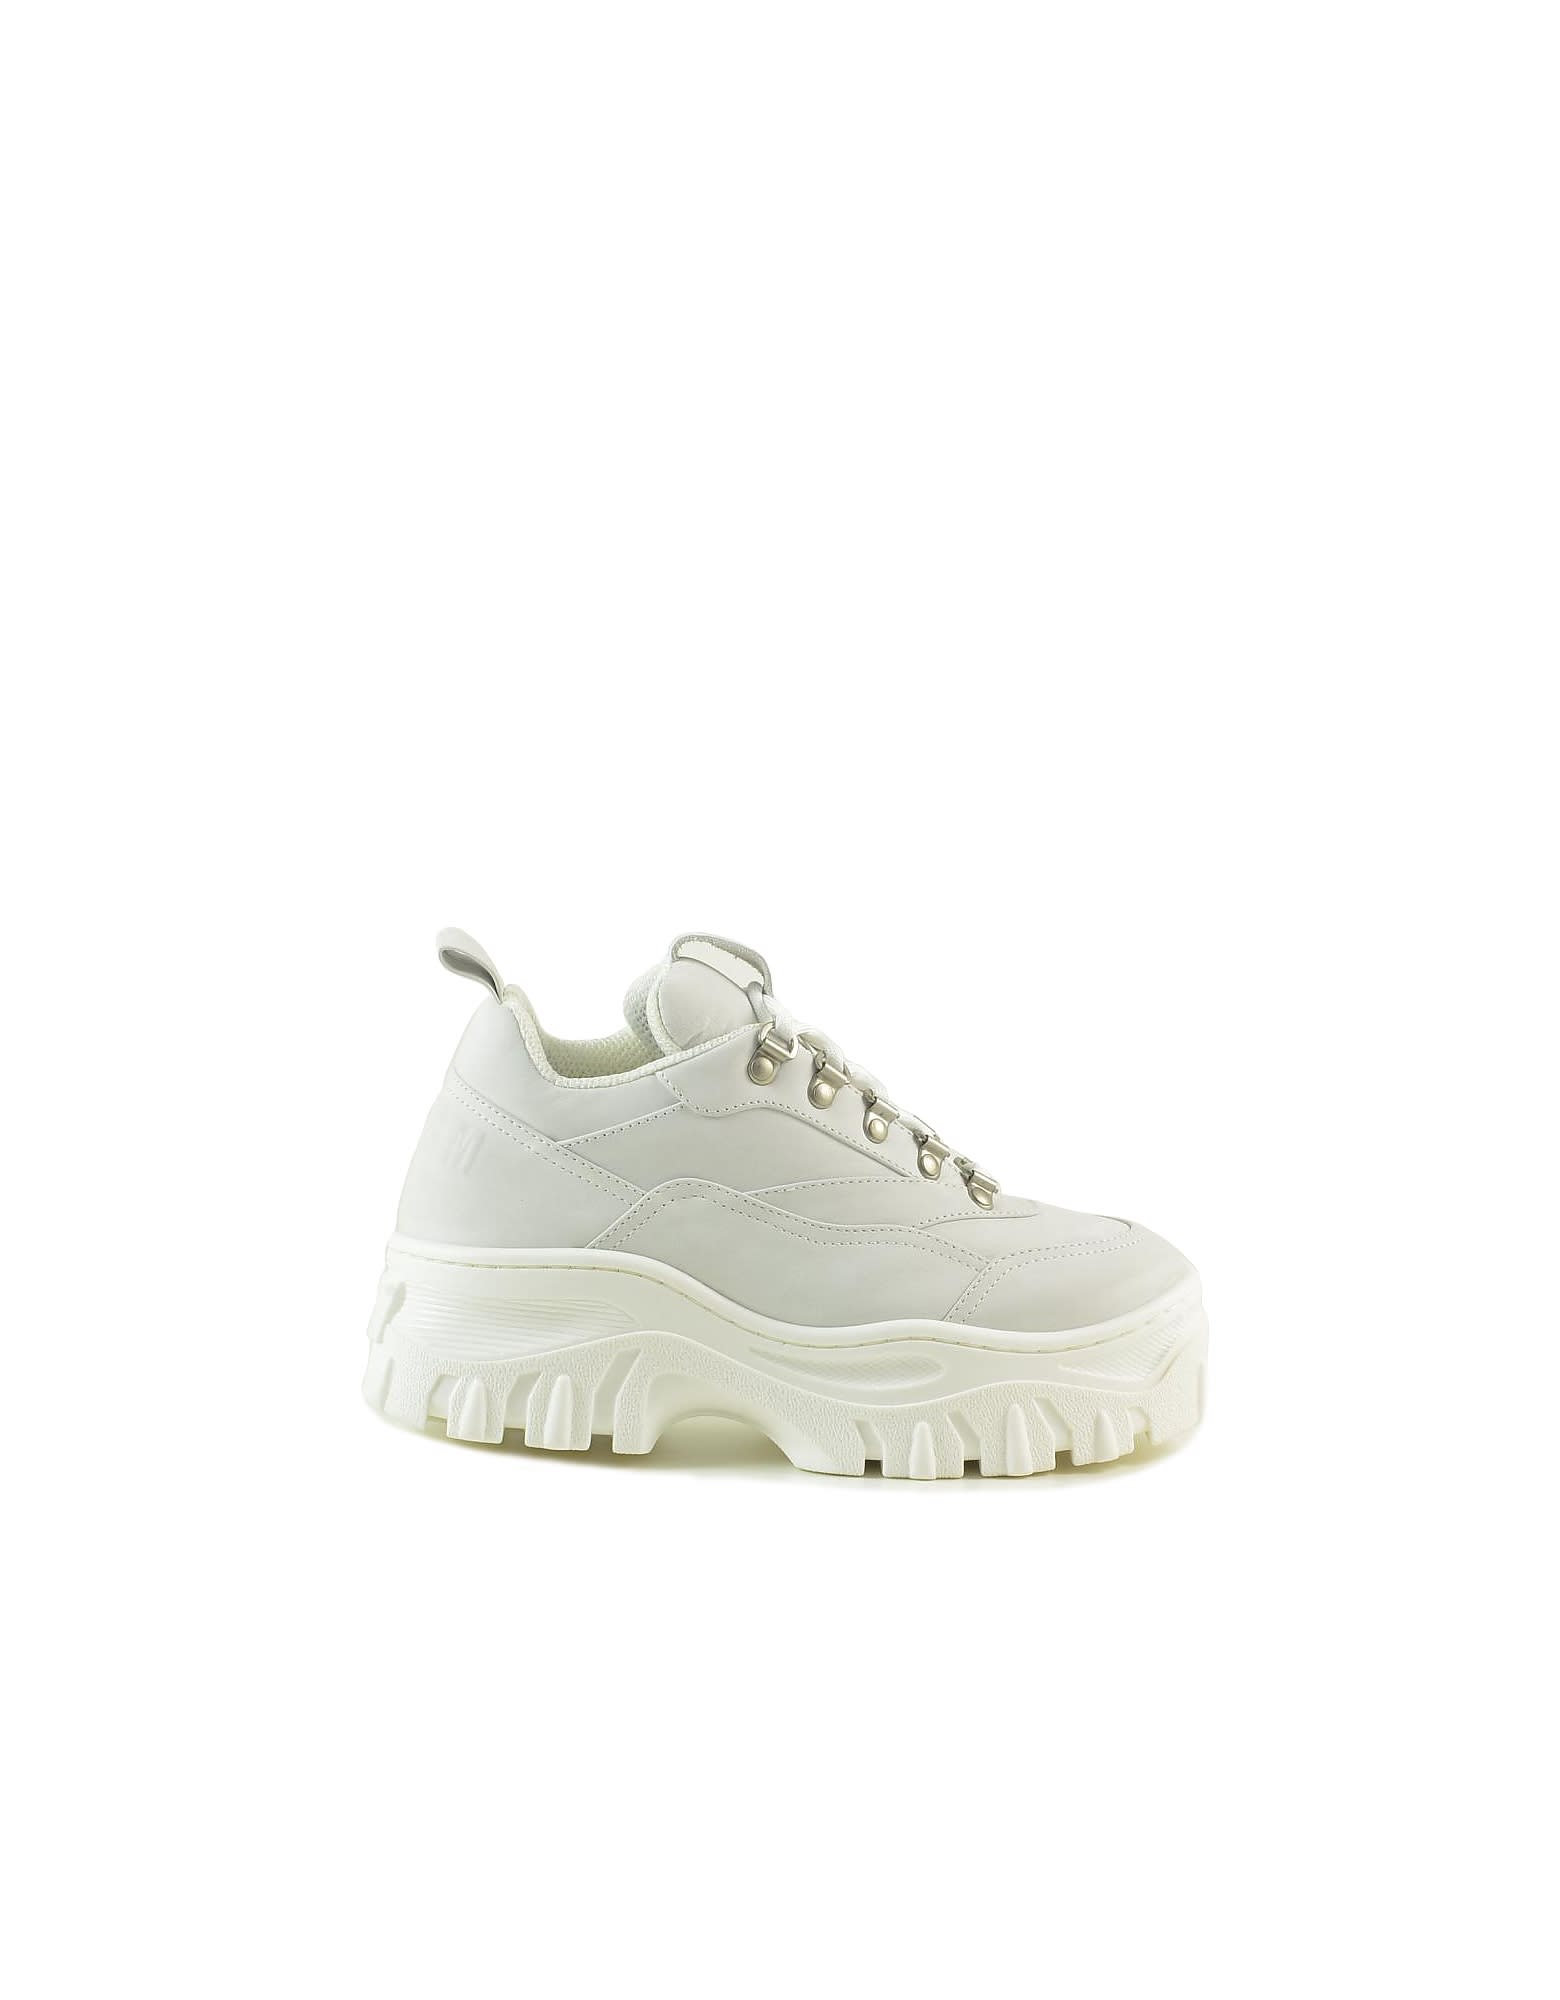 Msgm White Leather Womens Chunky Sneakers